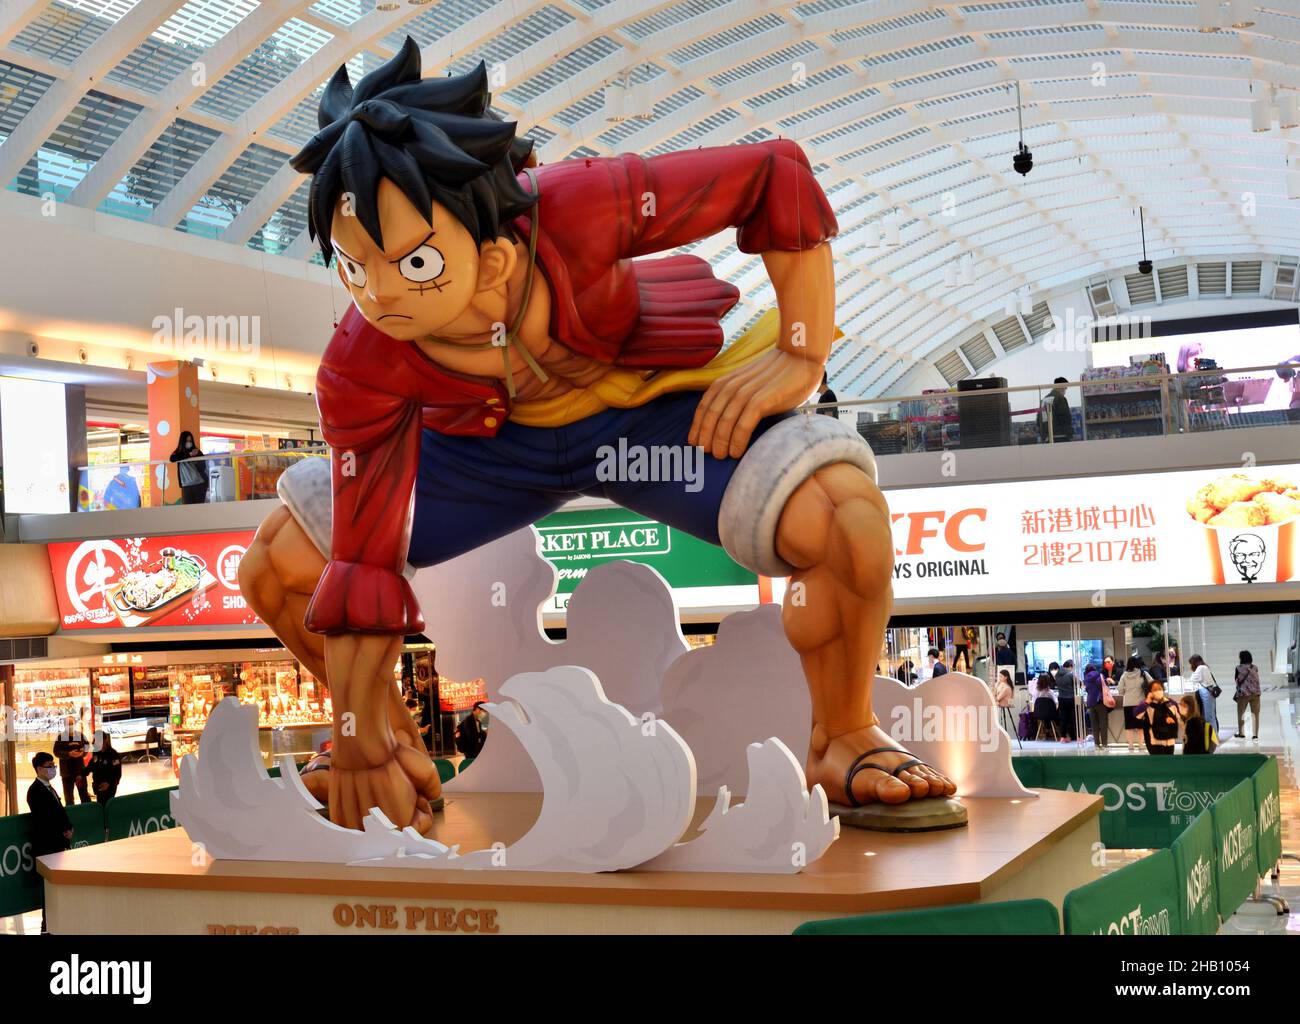 On podium inside a shopping arcade displays an inflatable figure of Luffy, the protagonist of Japanese manga One Piece Stock Photo